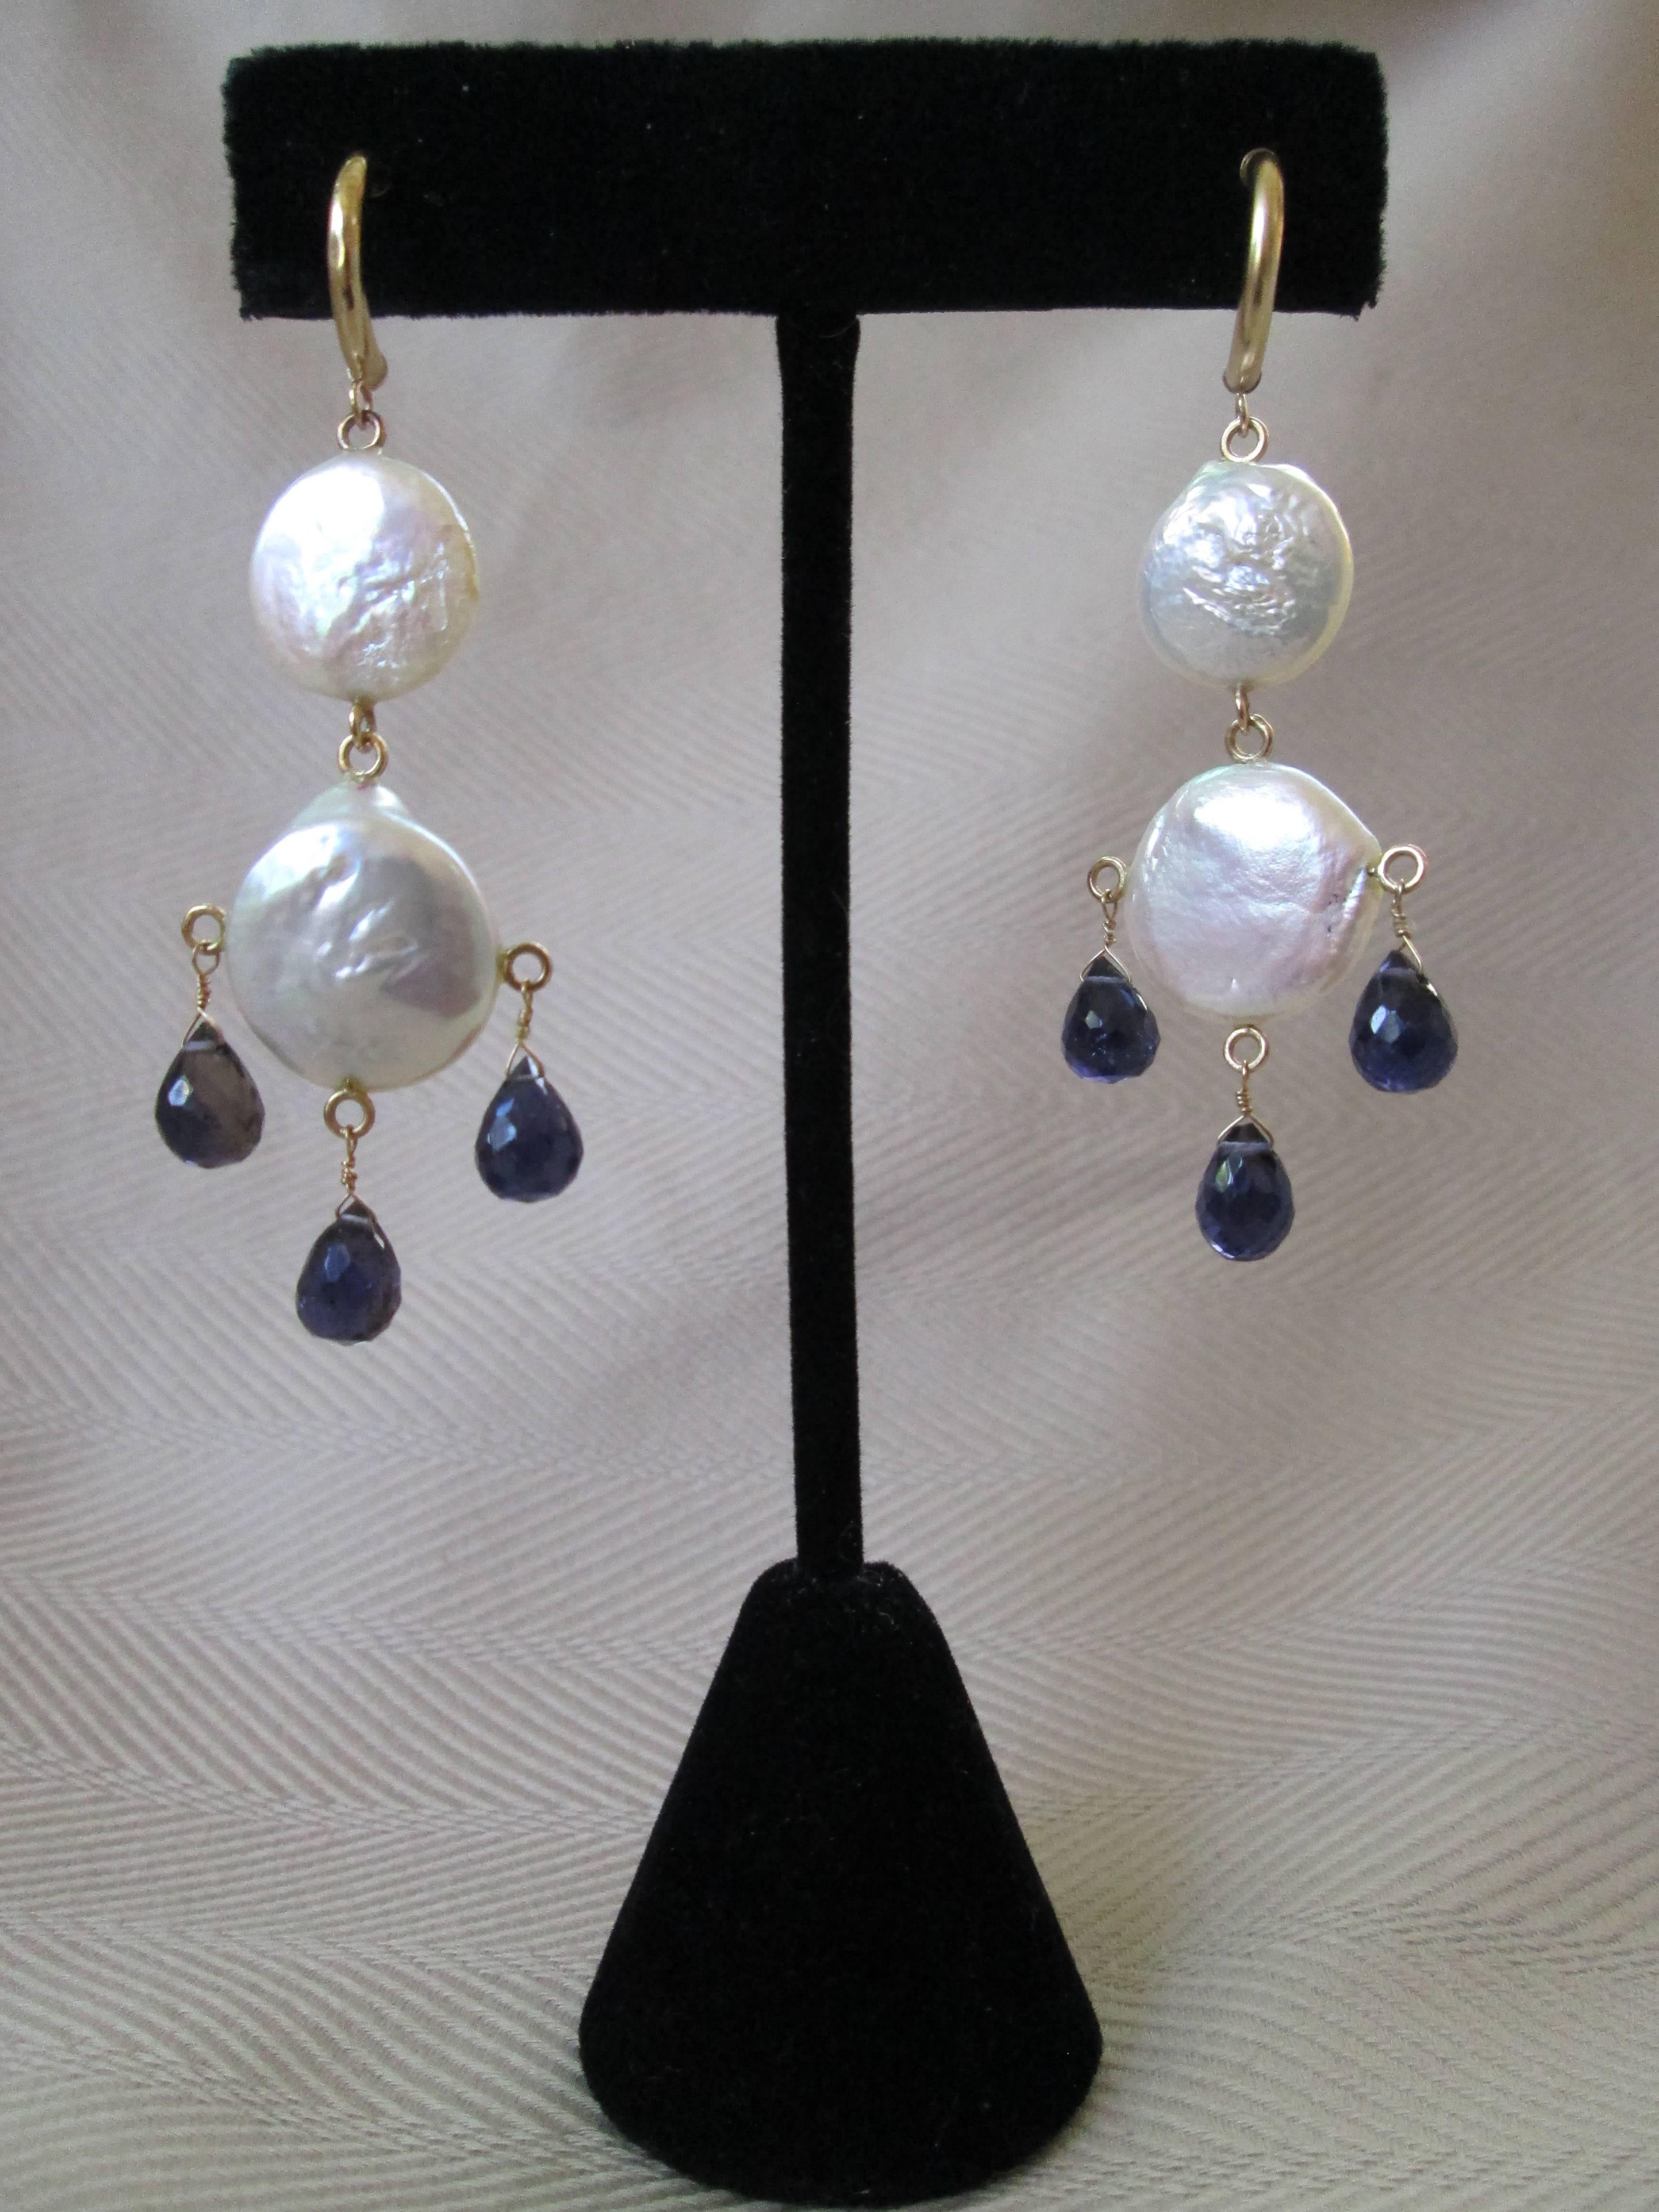 Flat coin Pearls, and Iolite Briolettes are connected by 14K Yellow Gold findings and combine to create a pair of distinct earrings, that sway with your motion. Earrings measure 2 1/4